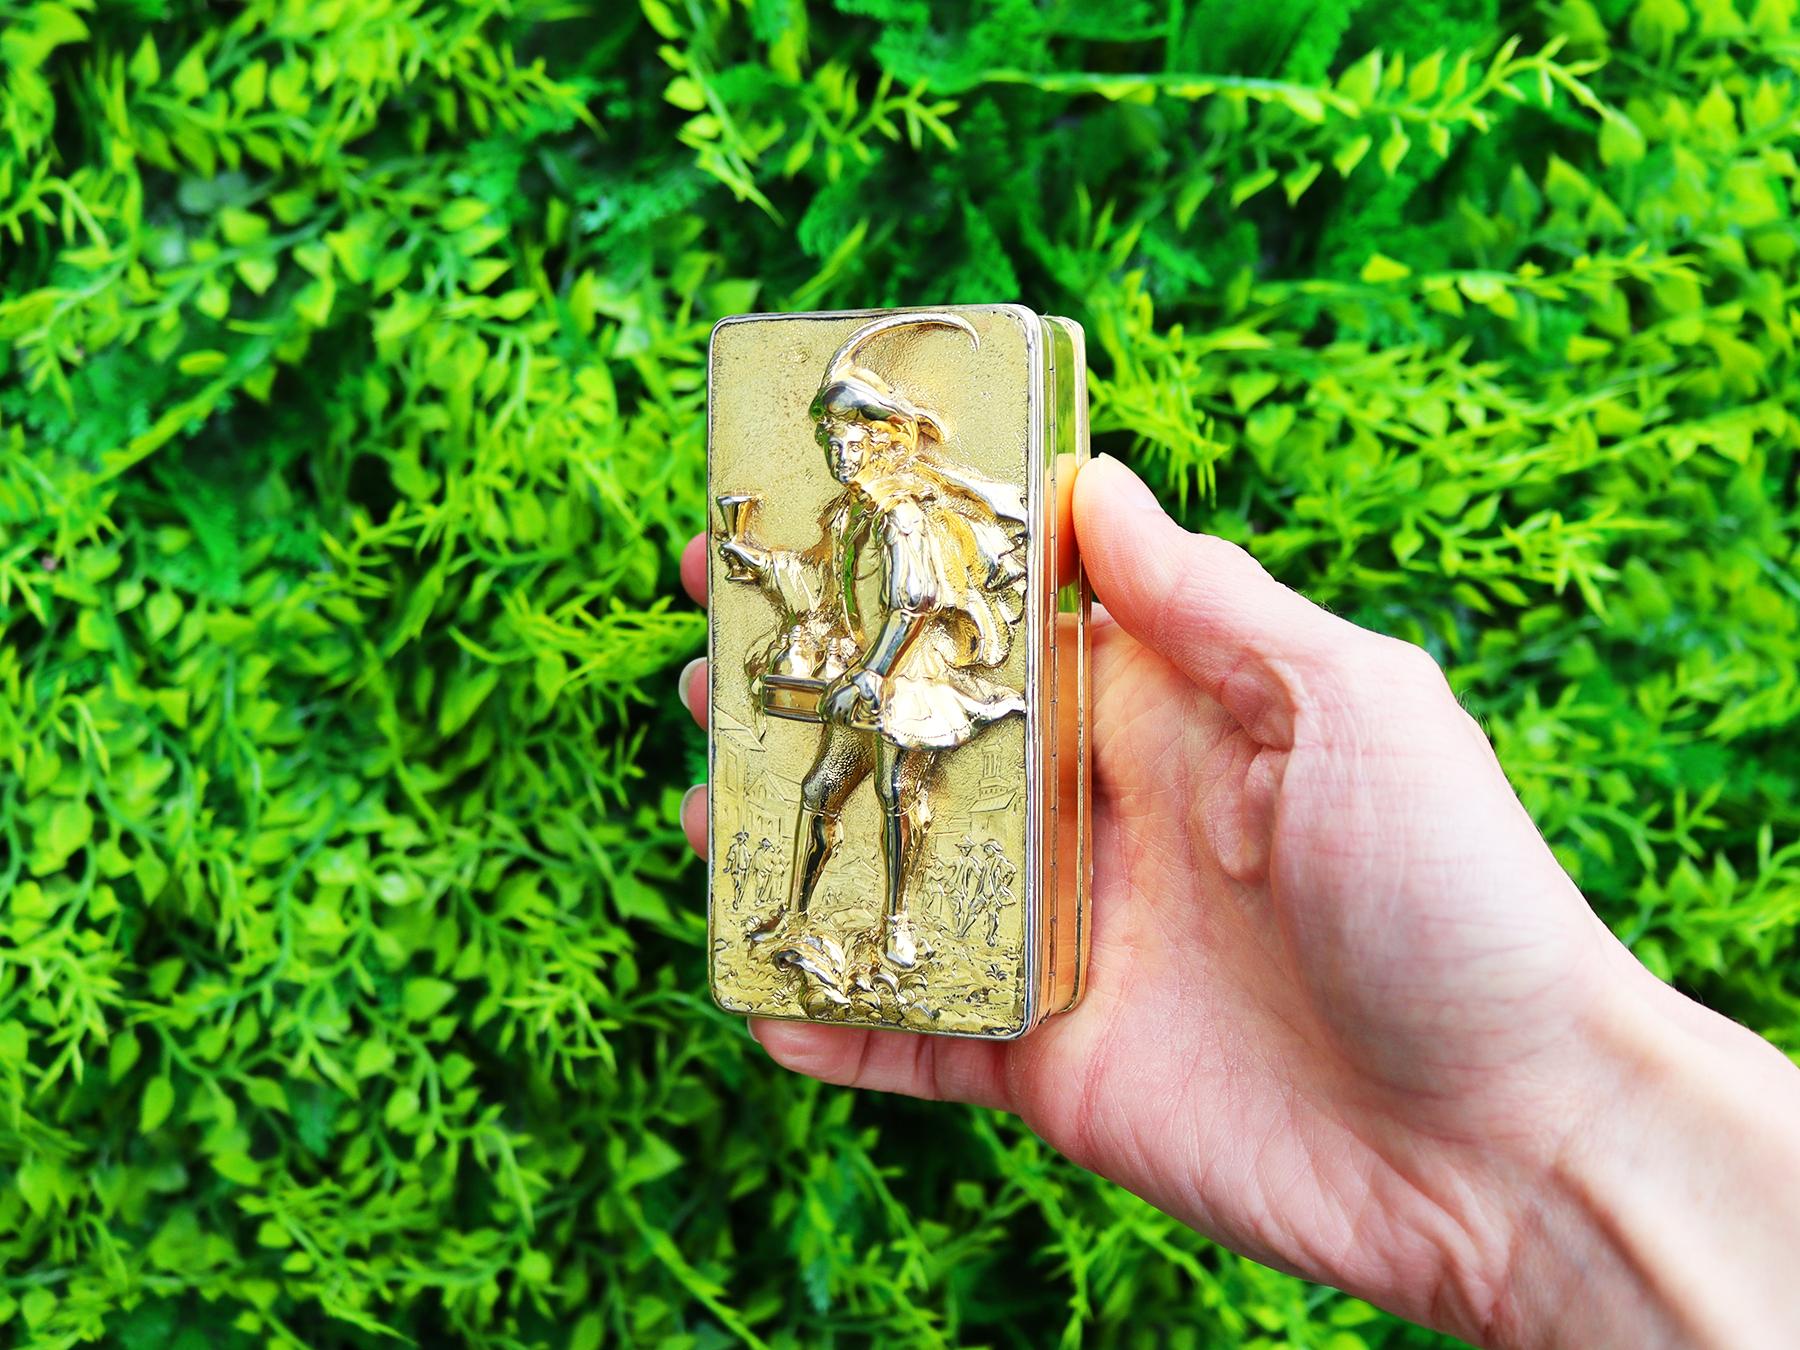 A magnificent, fine and impressive antique George IV English sterling silver gilt table snuff box; an addition to our antique box collection.

This magnificent antique George IV sterling silver gilt table snuff box has a rectangular form with